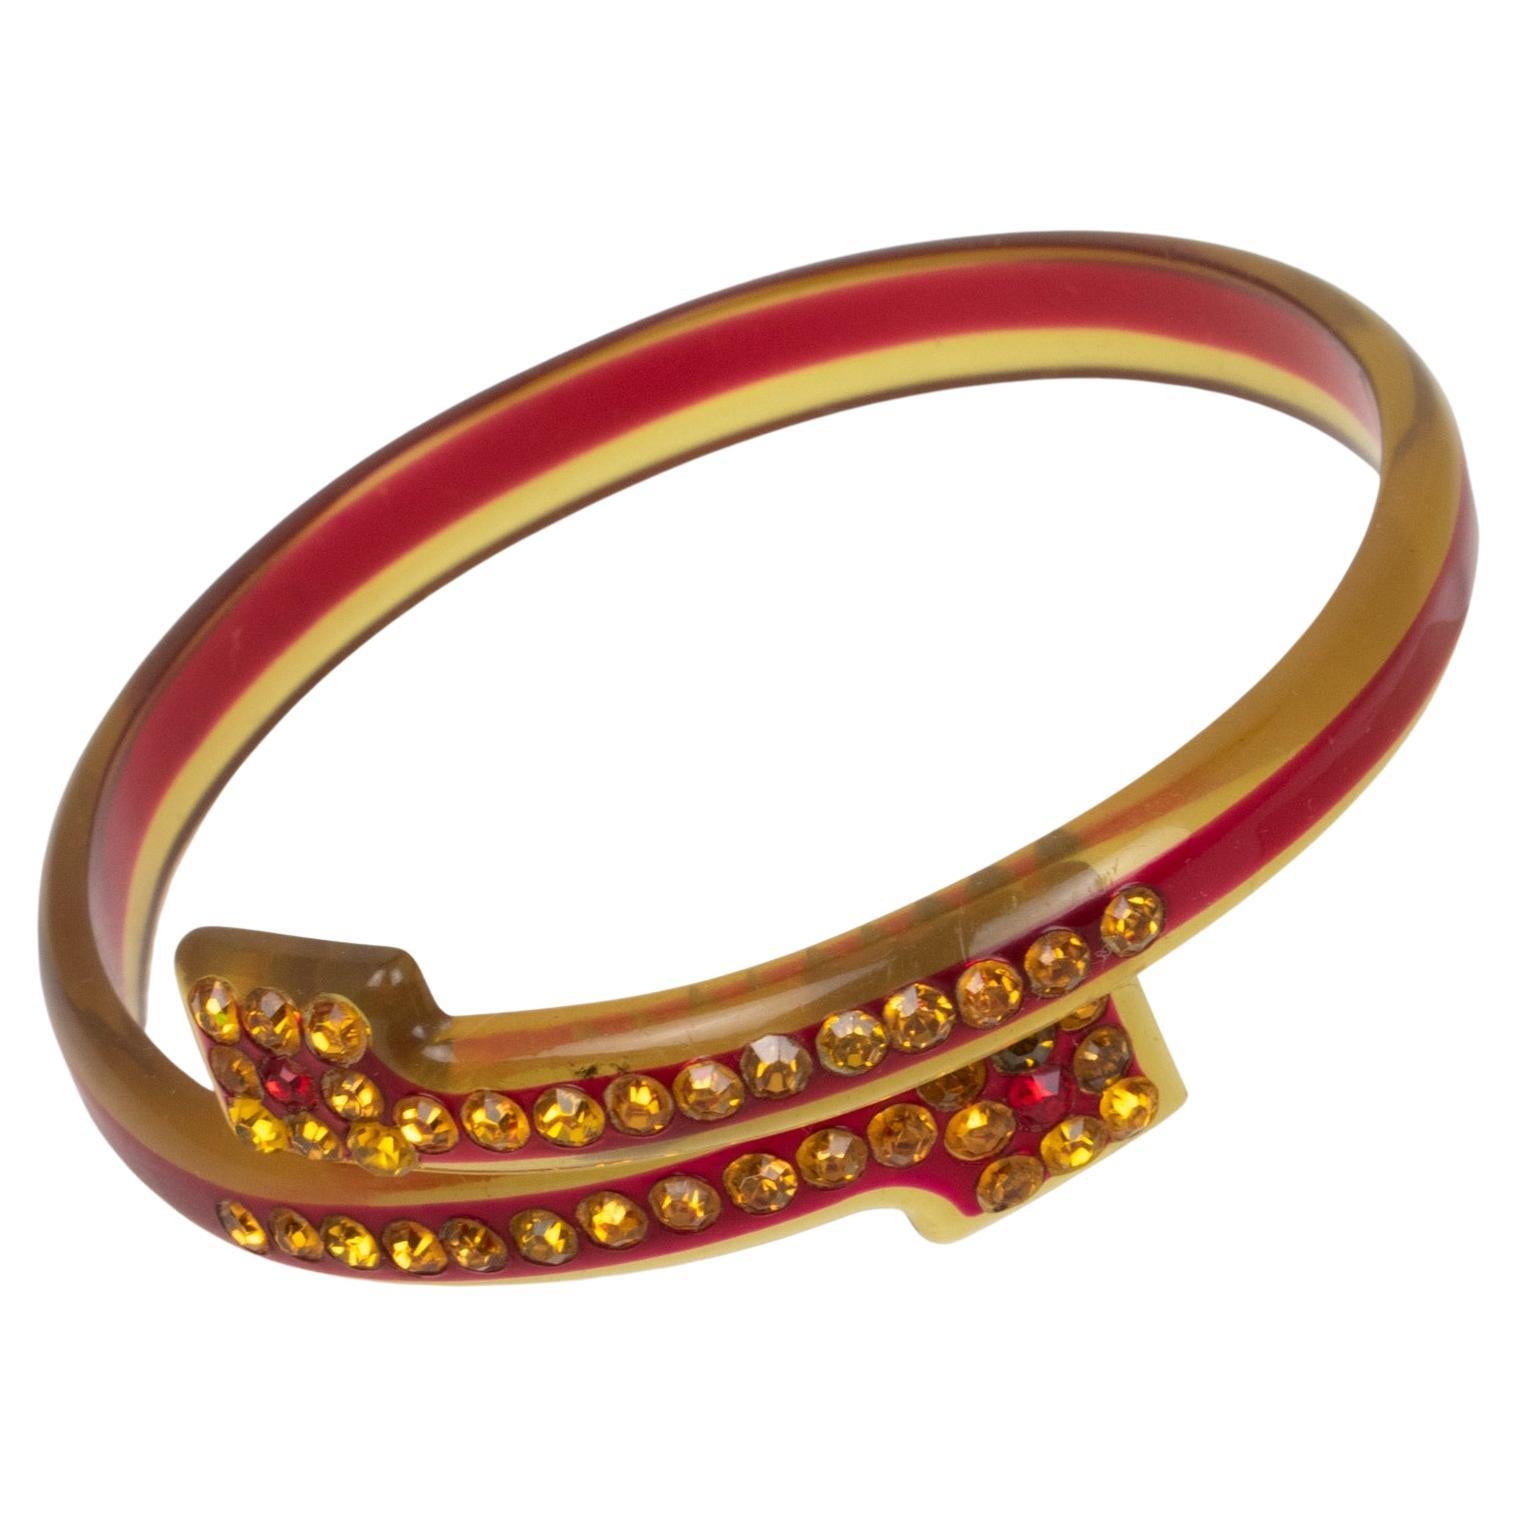 French Celluloid Bracelet Geometric Bypass Bangle with Orange and Red Crystal For Sale